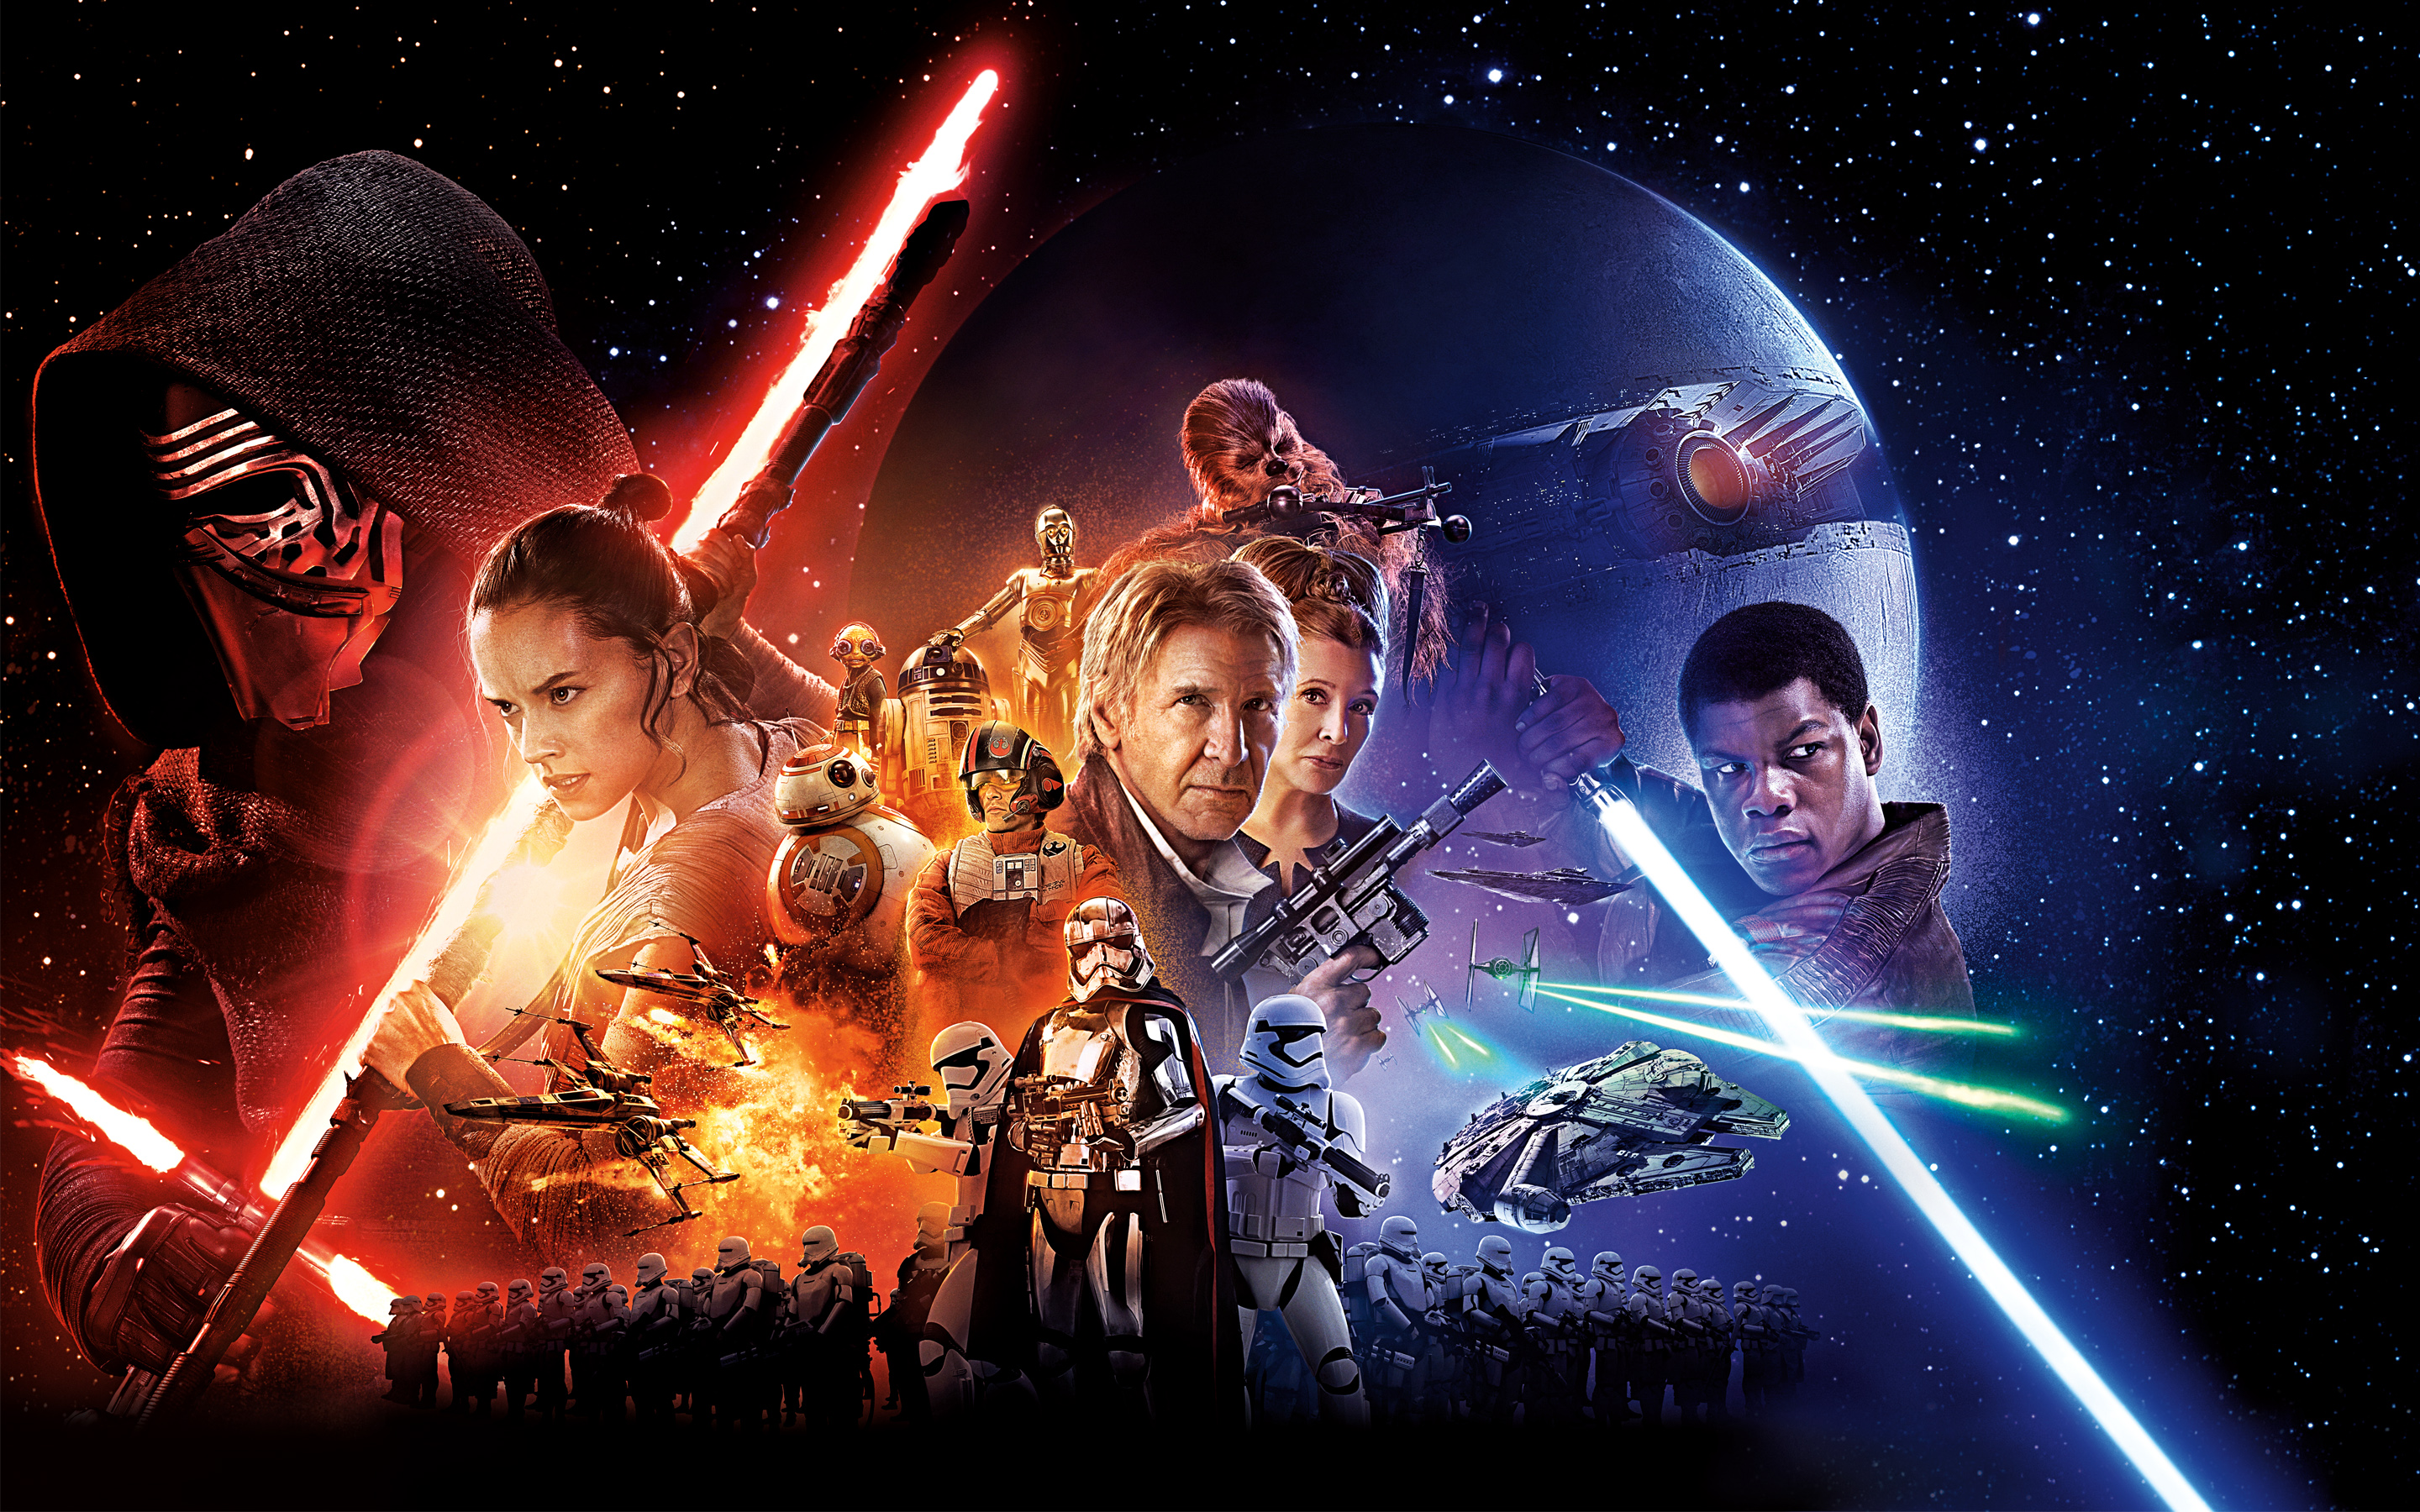 Star Wars Episode VII The Force Awakens Movie Wallpapers HD